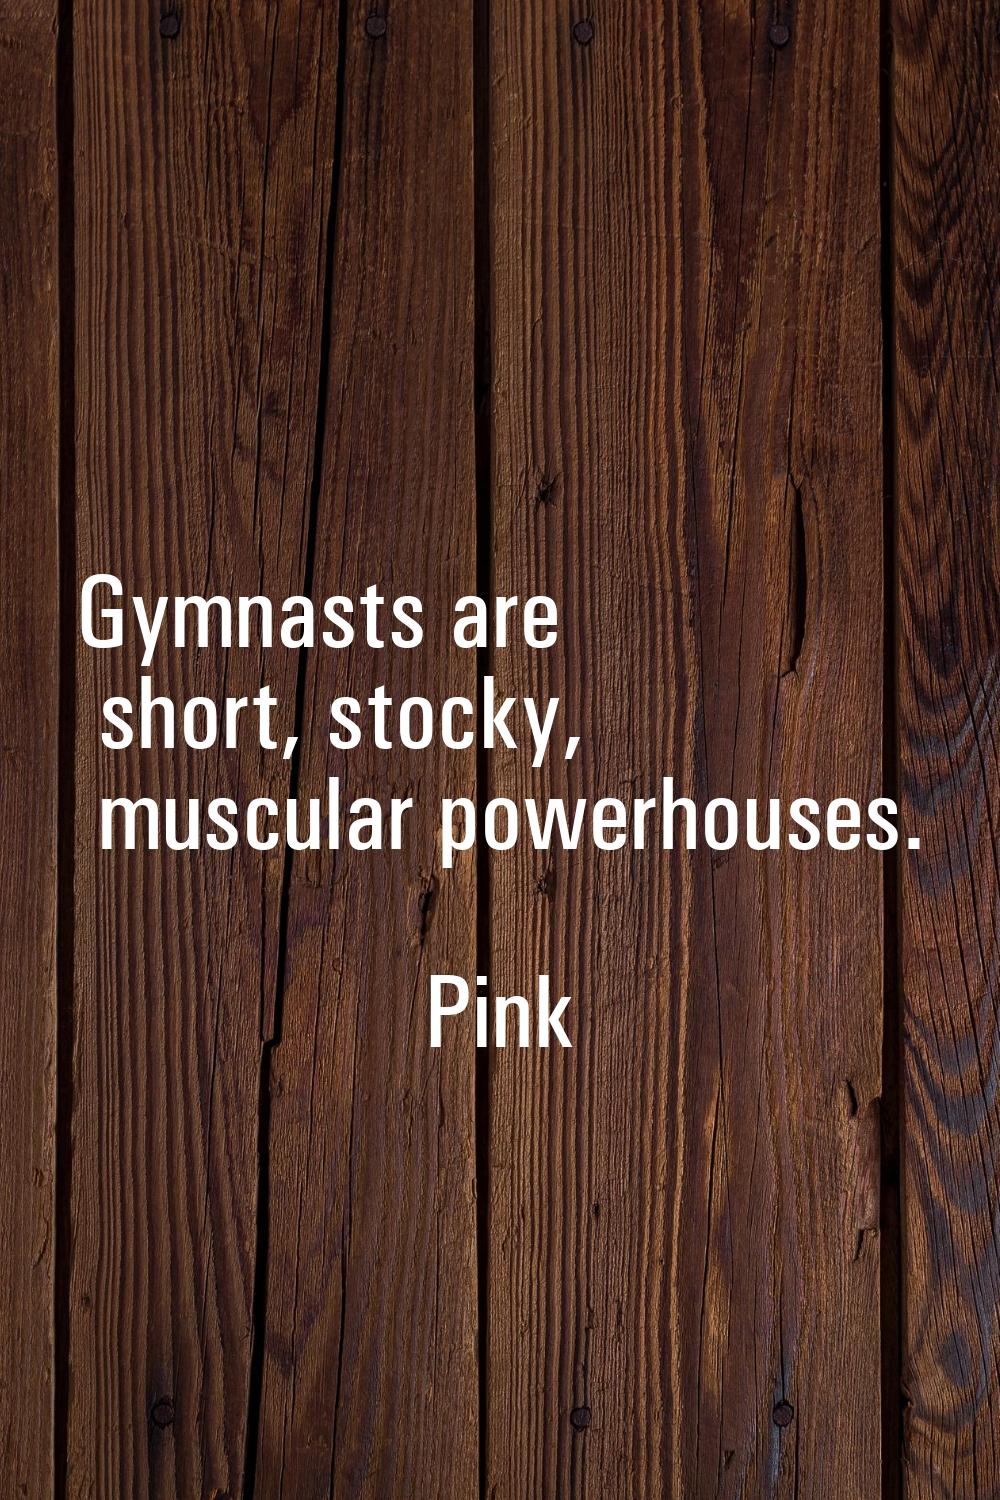 Gymnasts are short, stocky, muscular powerhouses.